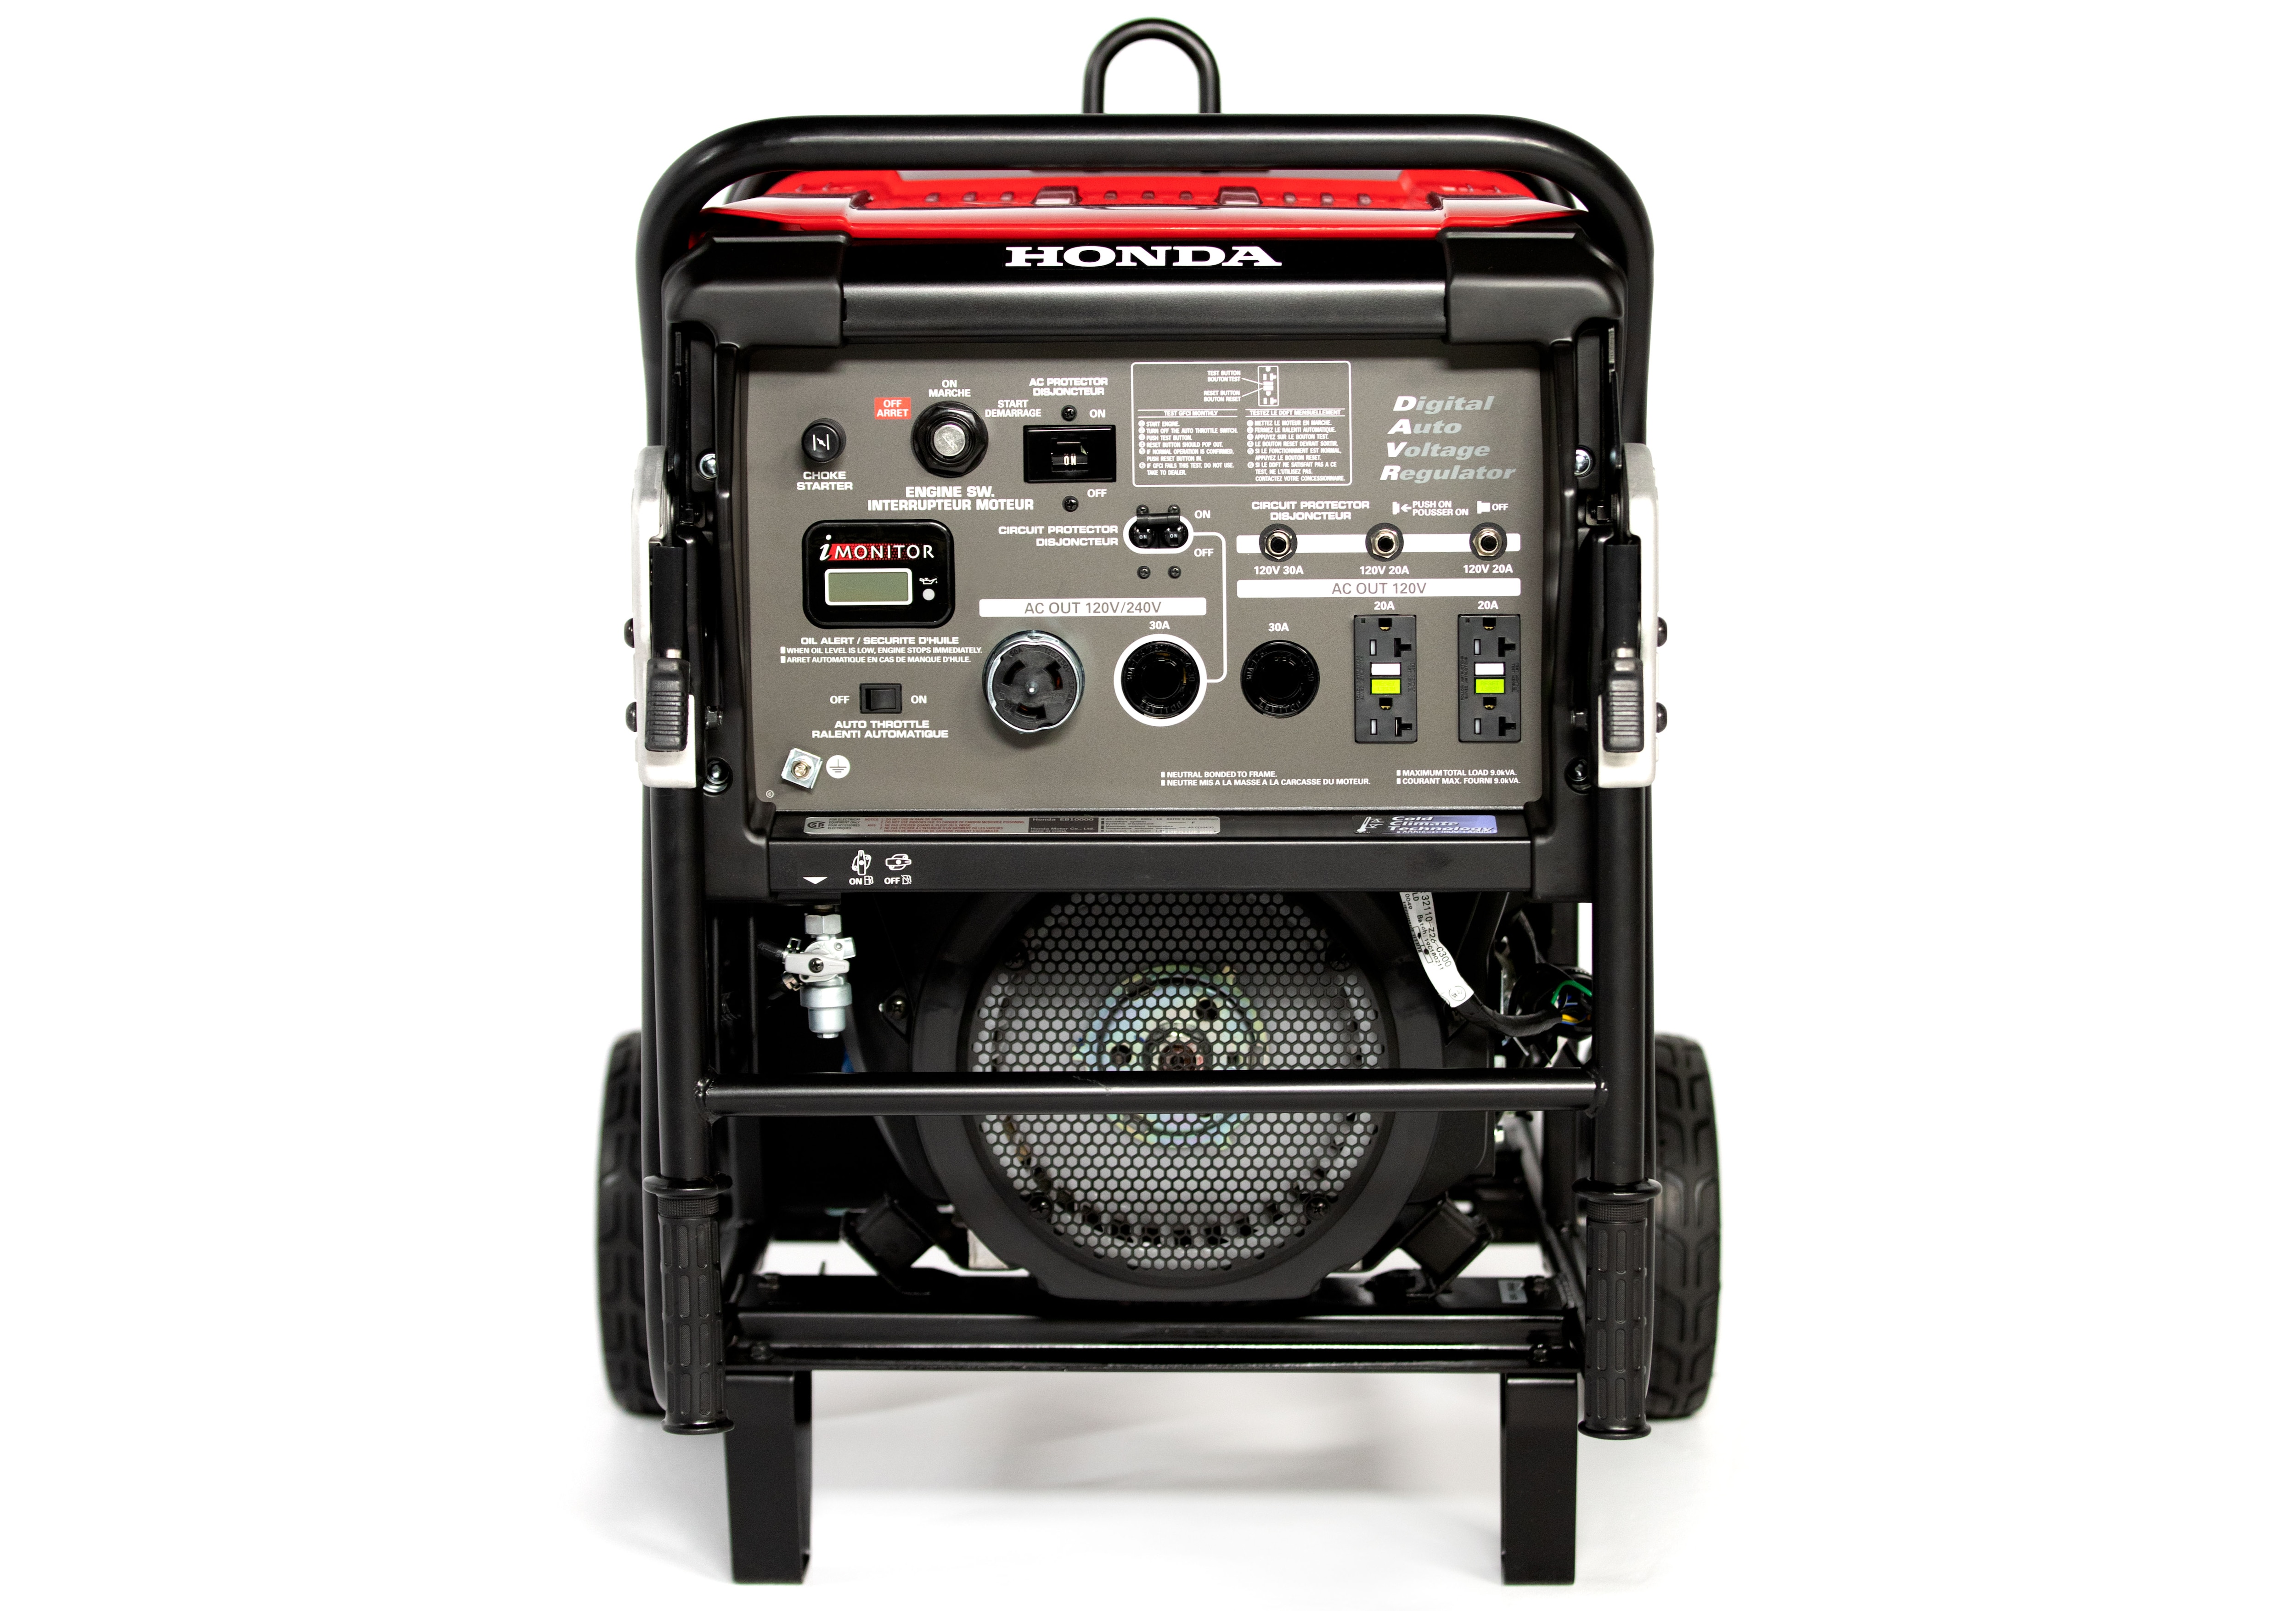 Image of the Commercial 10000 GFCI ES generator